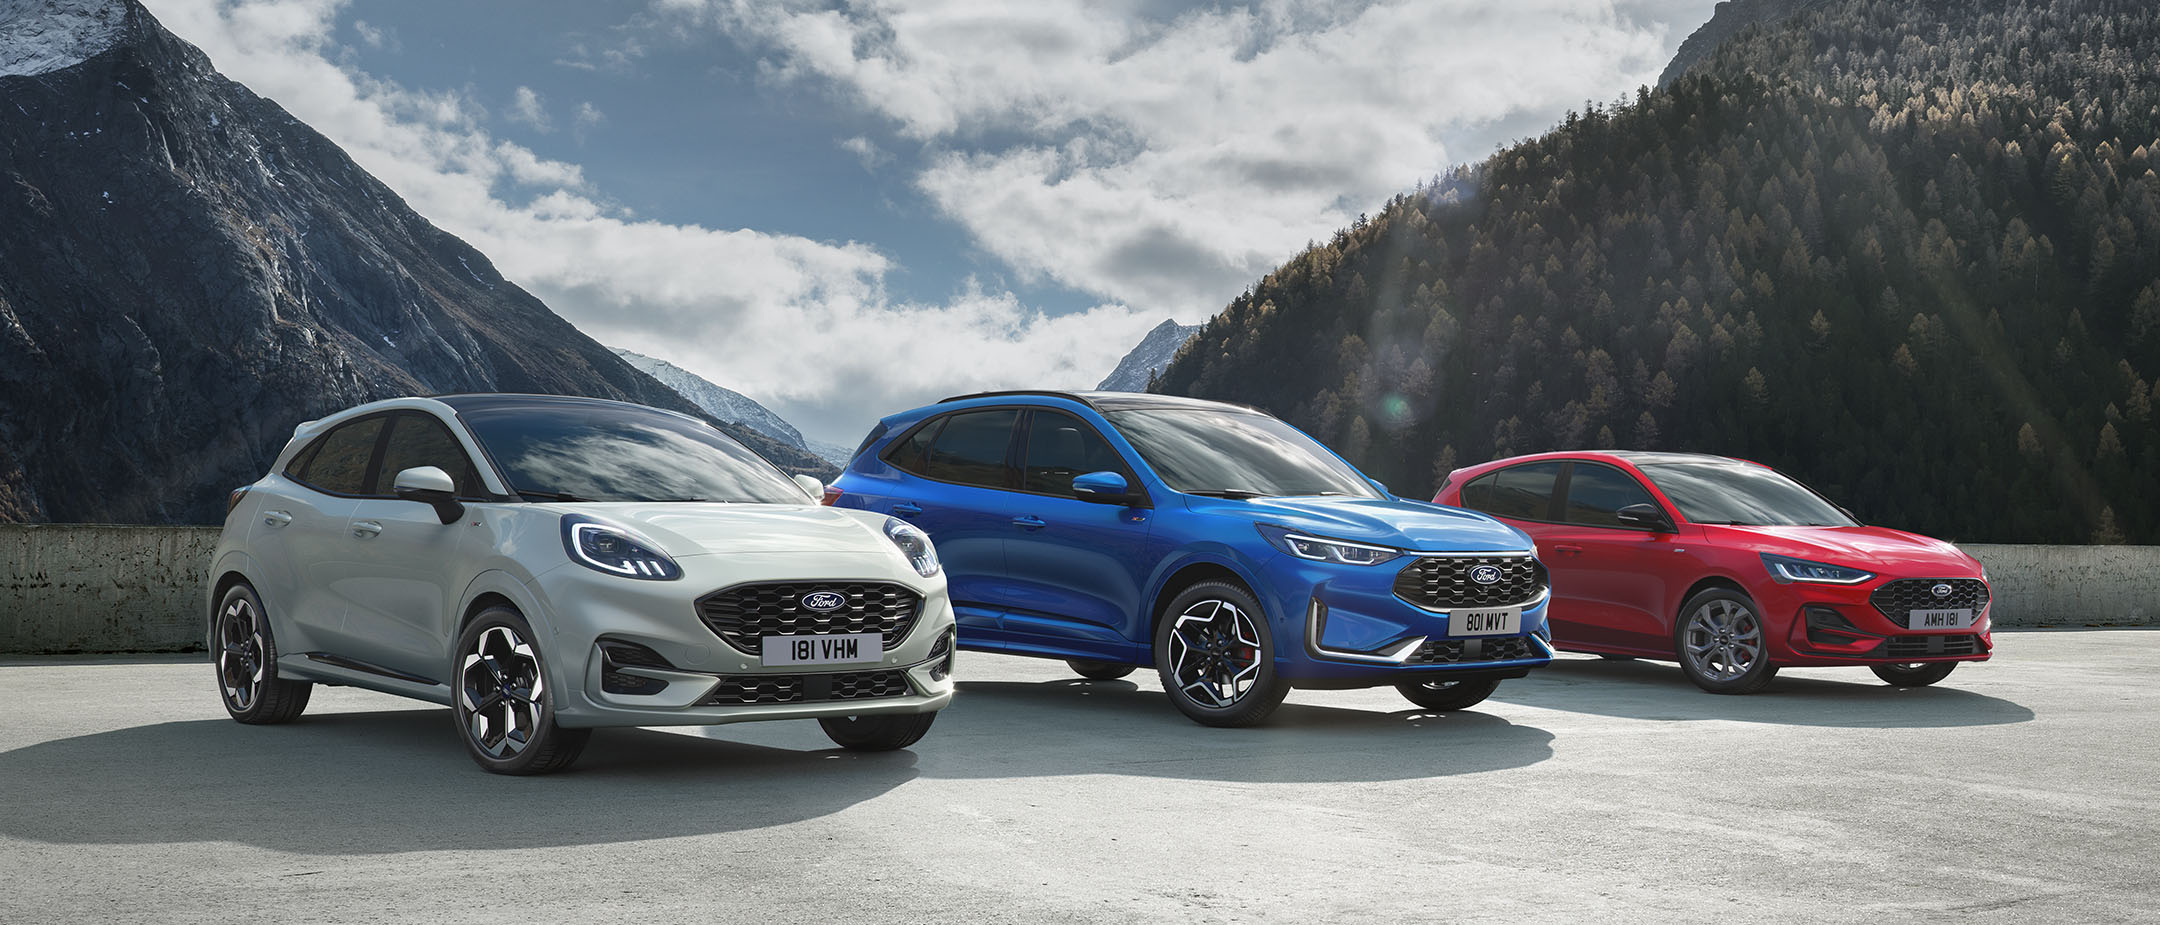 Ford Puma, Ford Kuga and Ford Focus parked